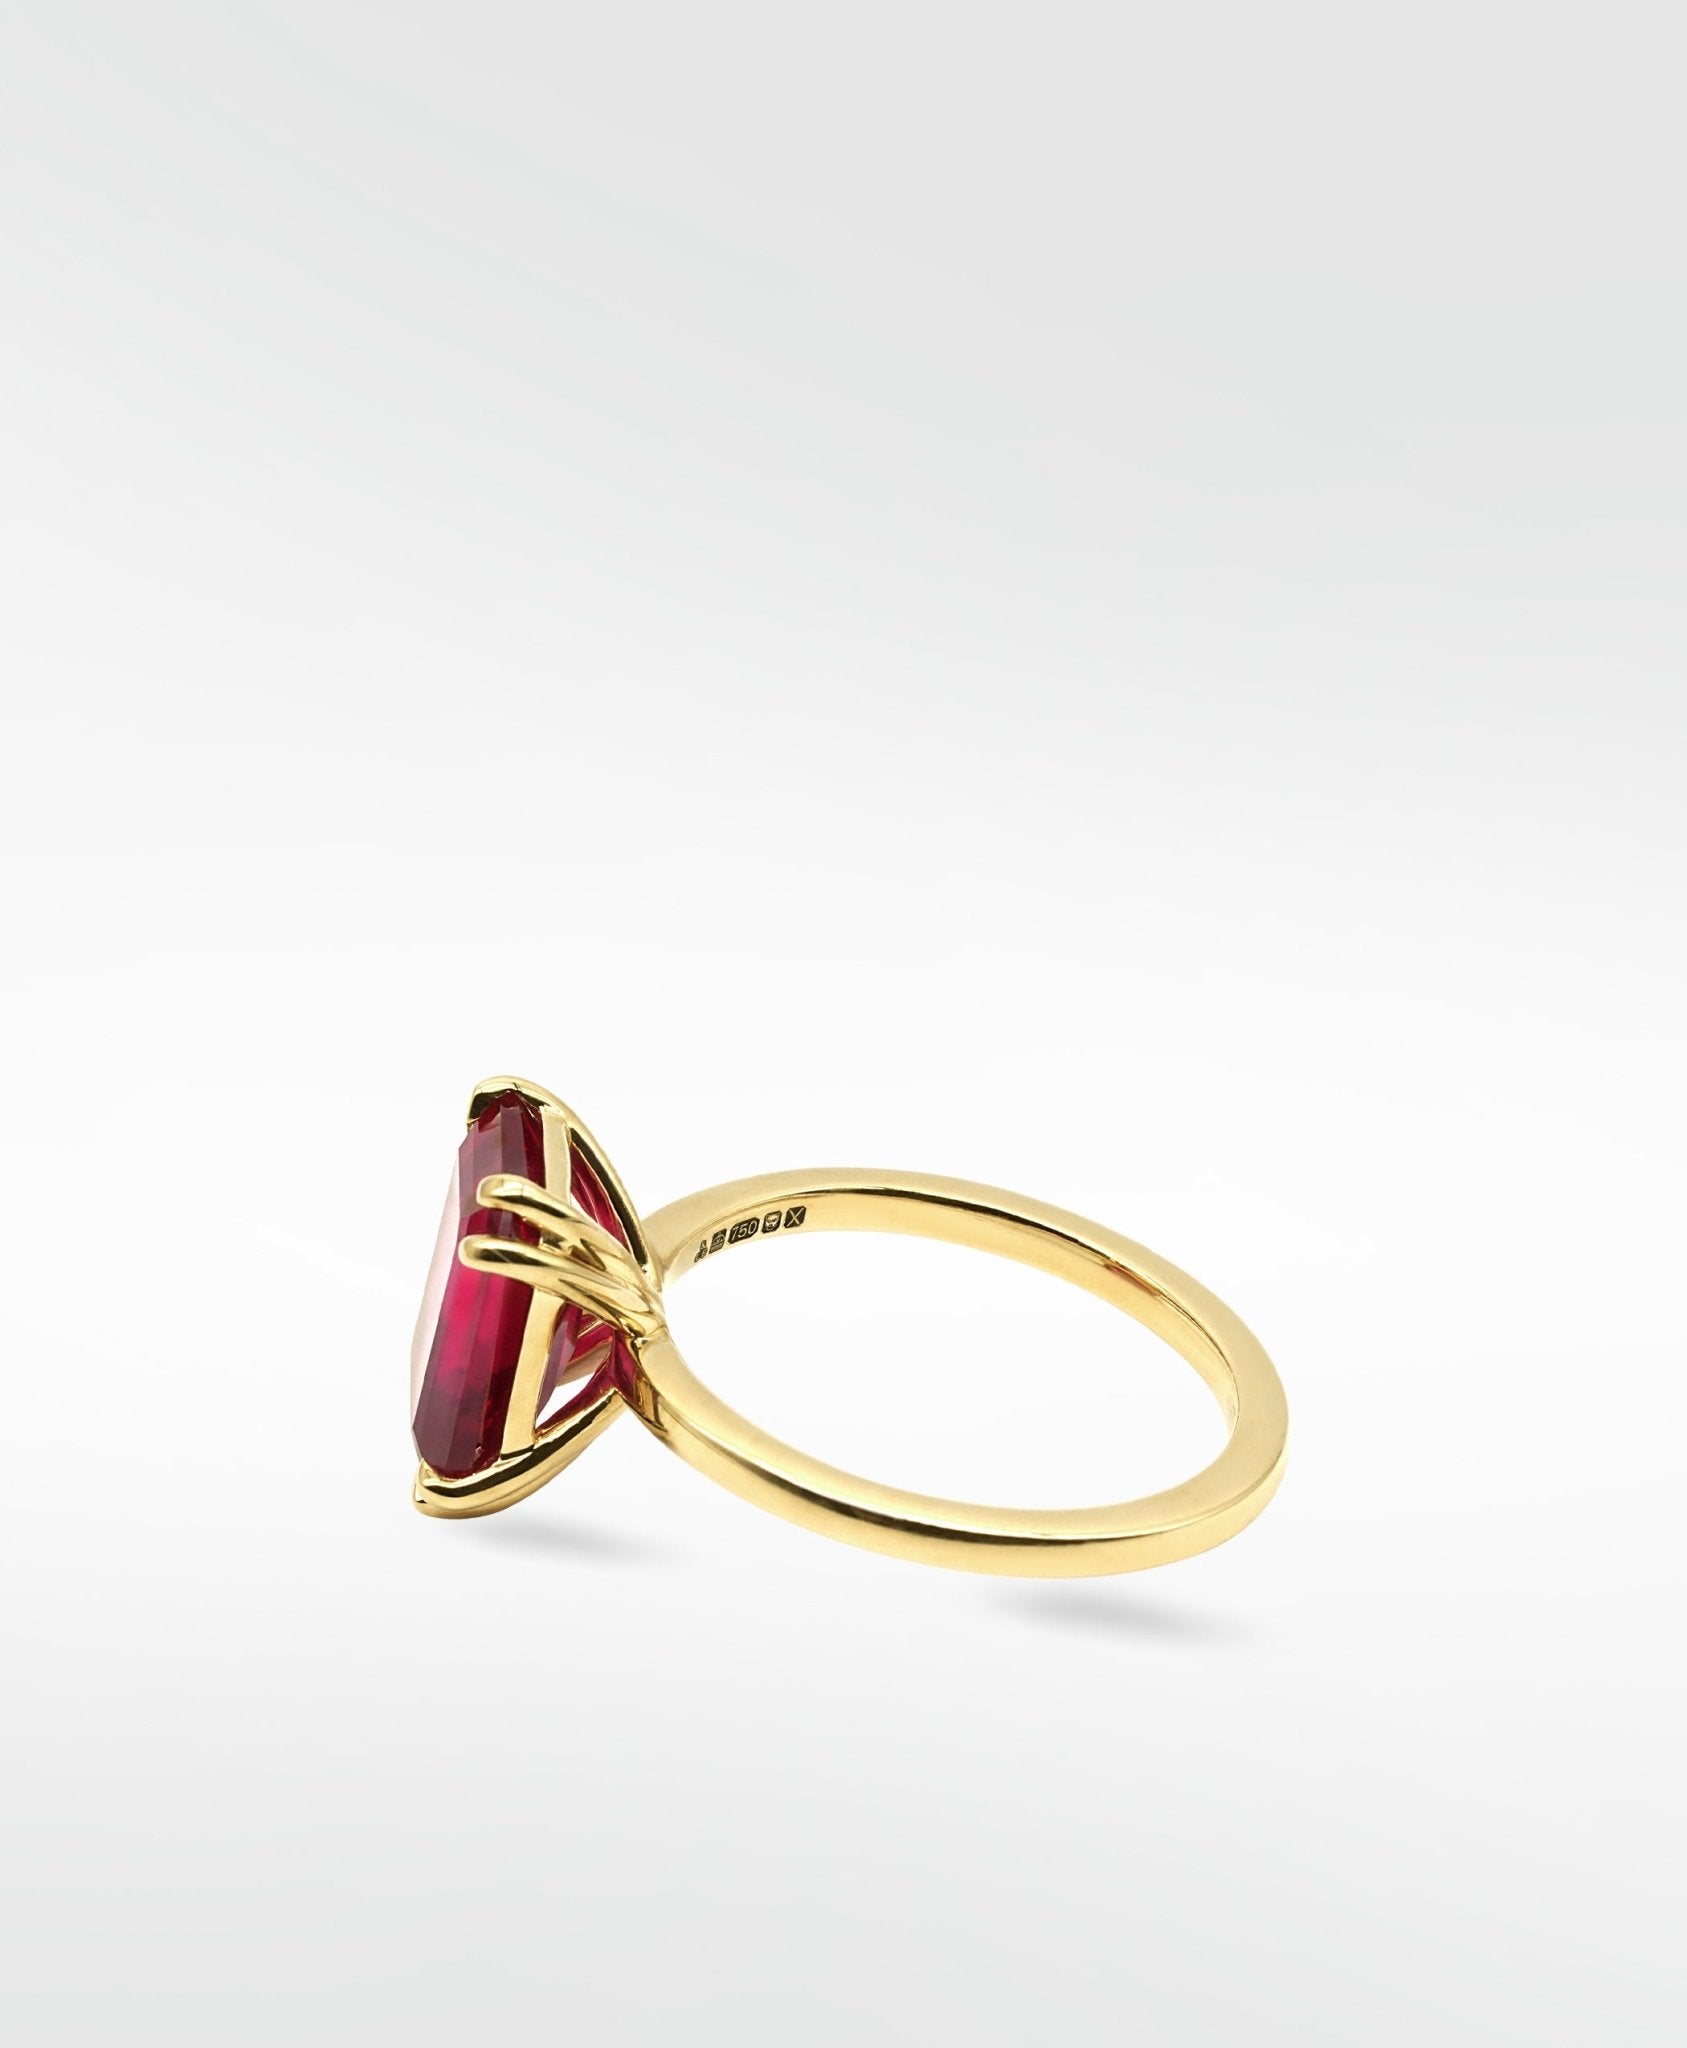 Flora Ruby Octad Cocktail Ring in 18k Yellow Gold - Lark and Berry